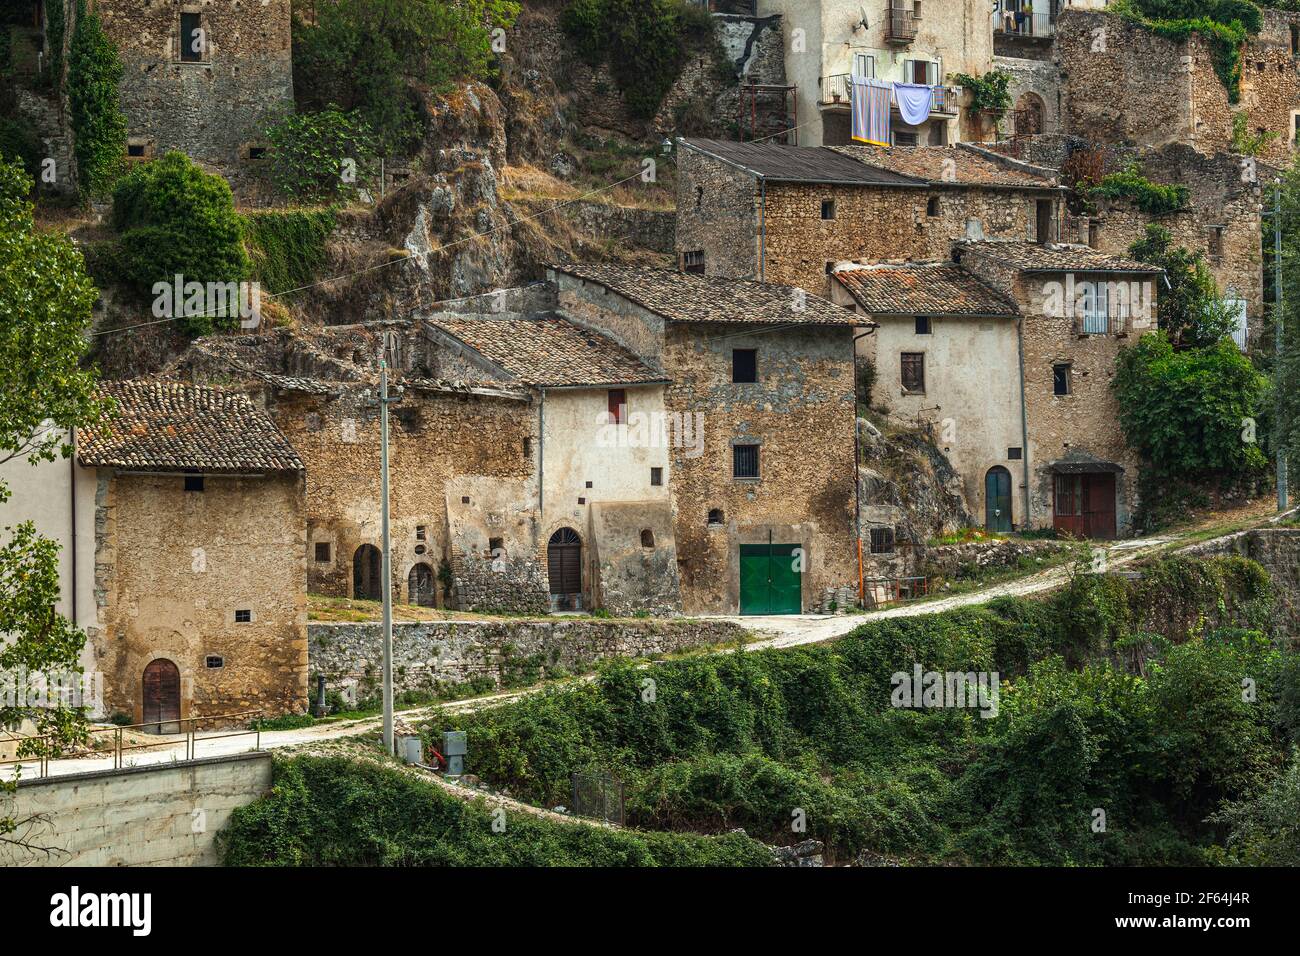 Old stone houses and stables of a still inhabited mountain village. Pettorano sul Gizio, Province of l'Aquila, Abruzzo, Italy, Europe Stock Photo